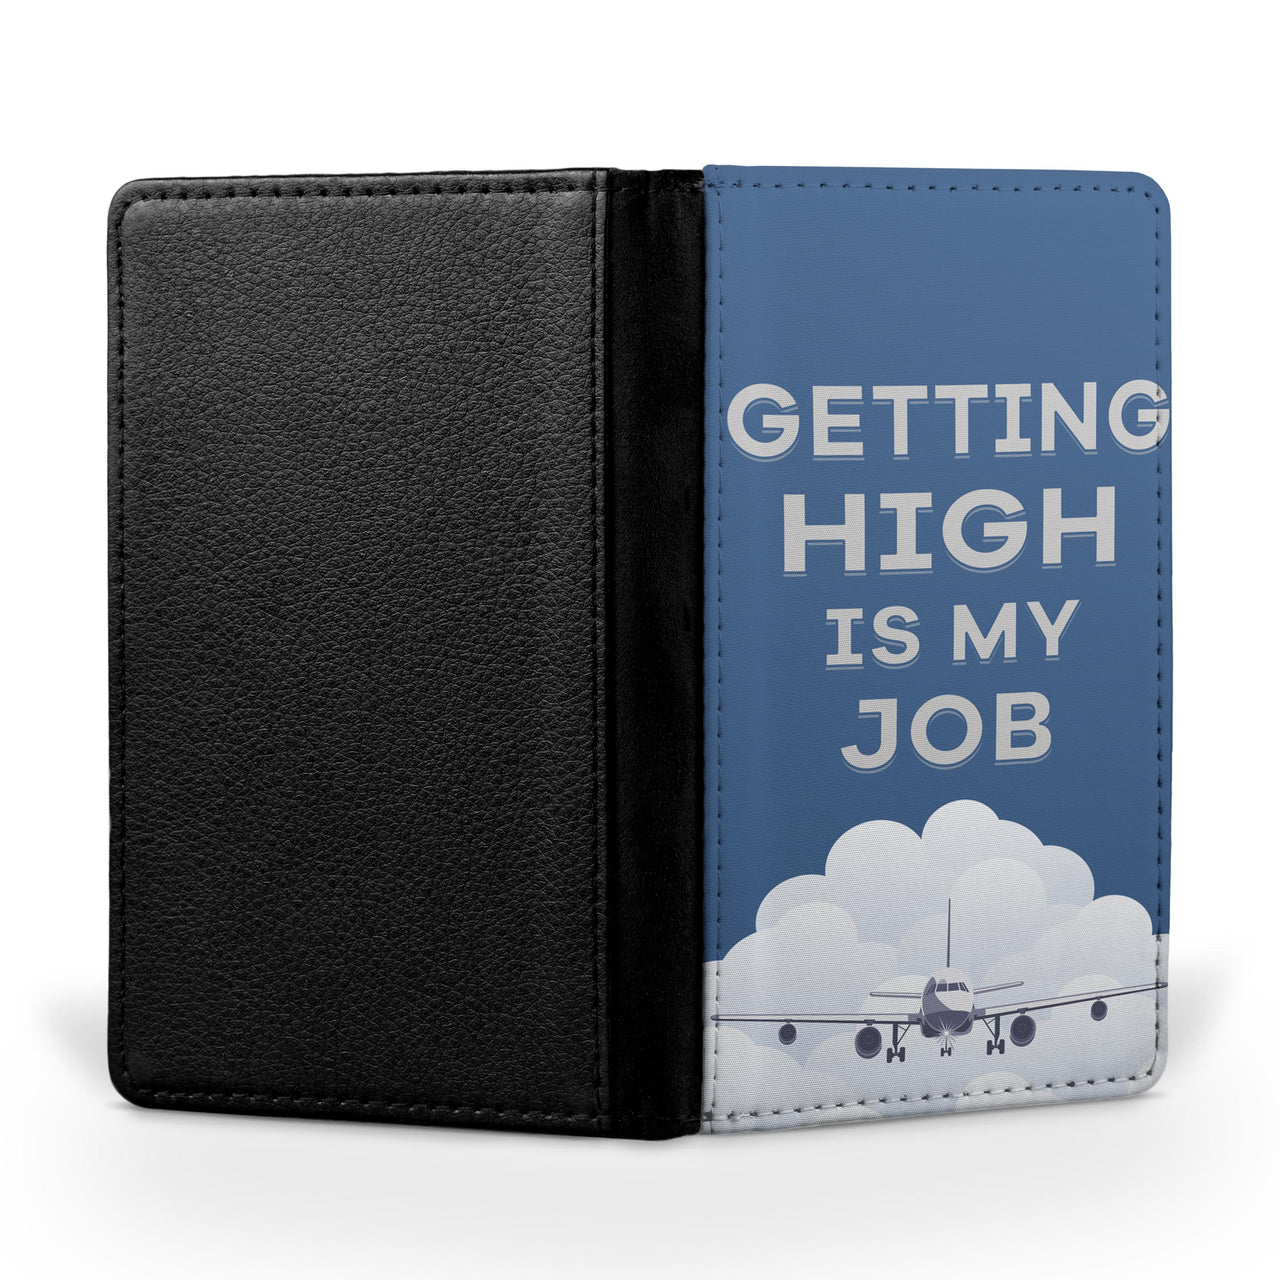 Getting High is My Job Printed Passport & Travel Cases